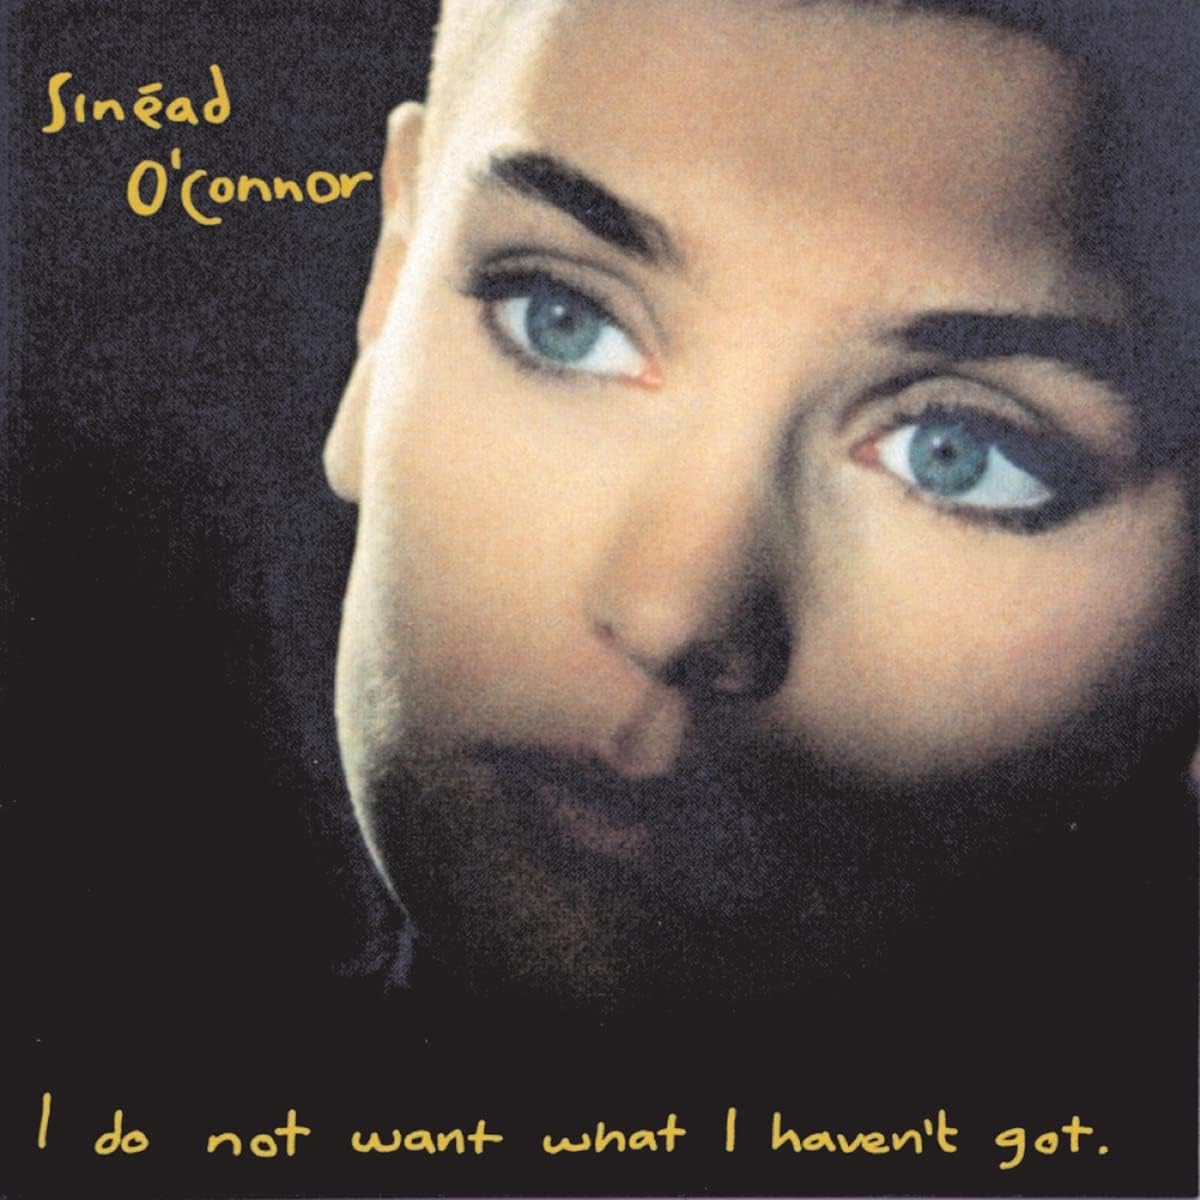 sinead-o-connor-i-do-not-want-what-i-havent-got